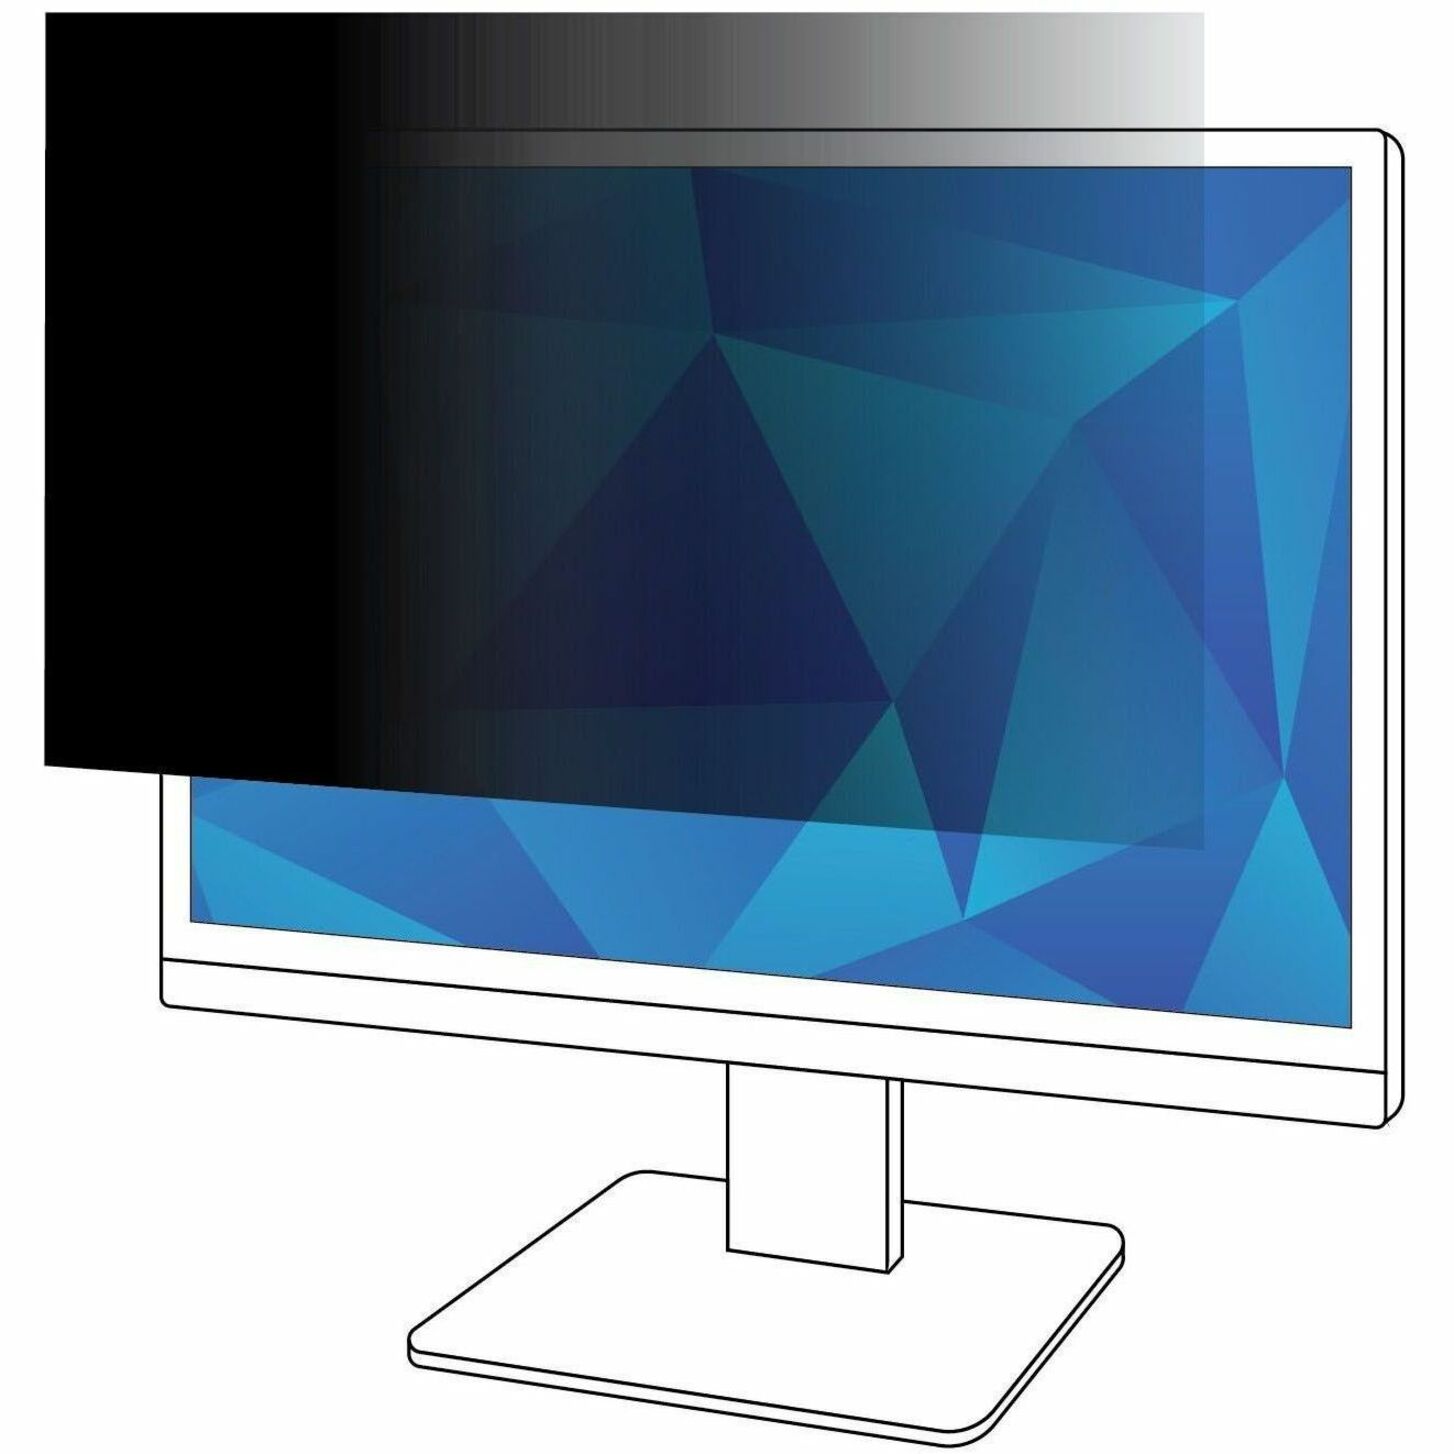 3M PF213C3B Privacy Filter for LCD Monitor 21.3", Easy to Apply, Easy Clean, Limited Viewing Angle, Matte Black